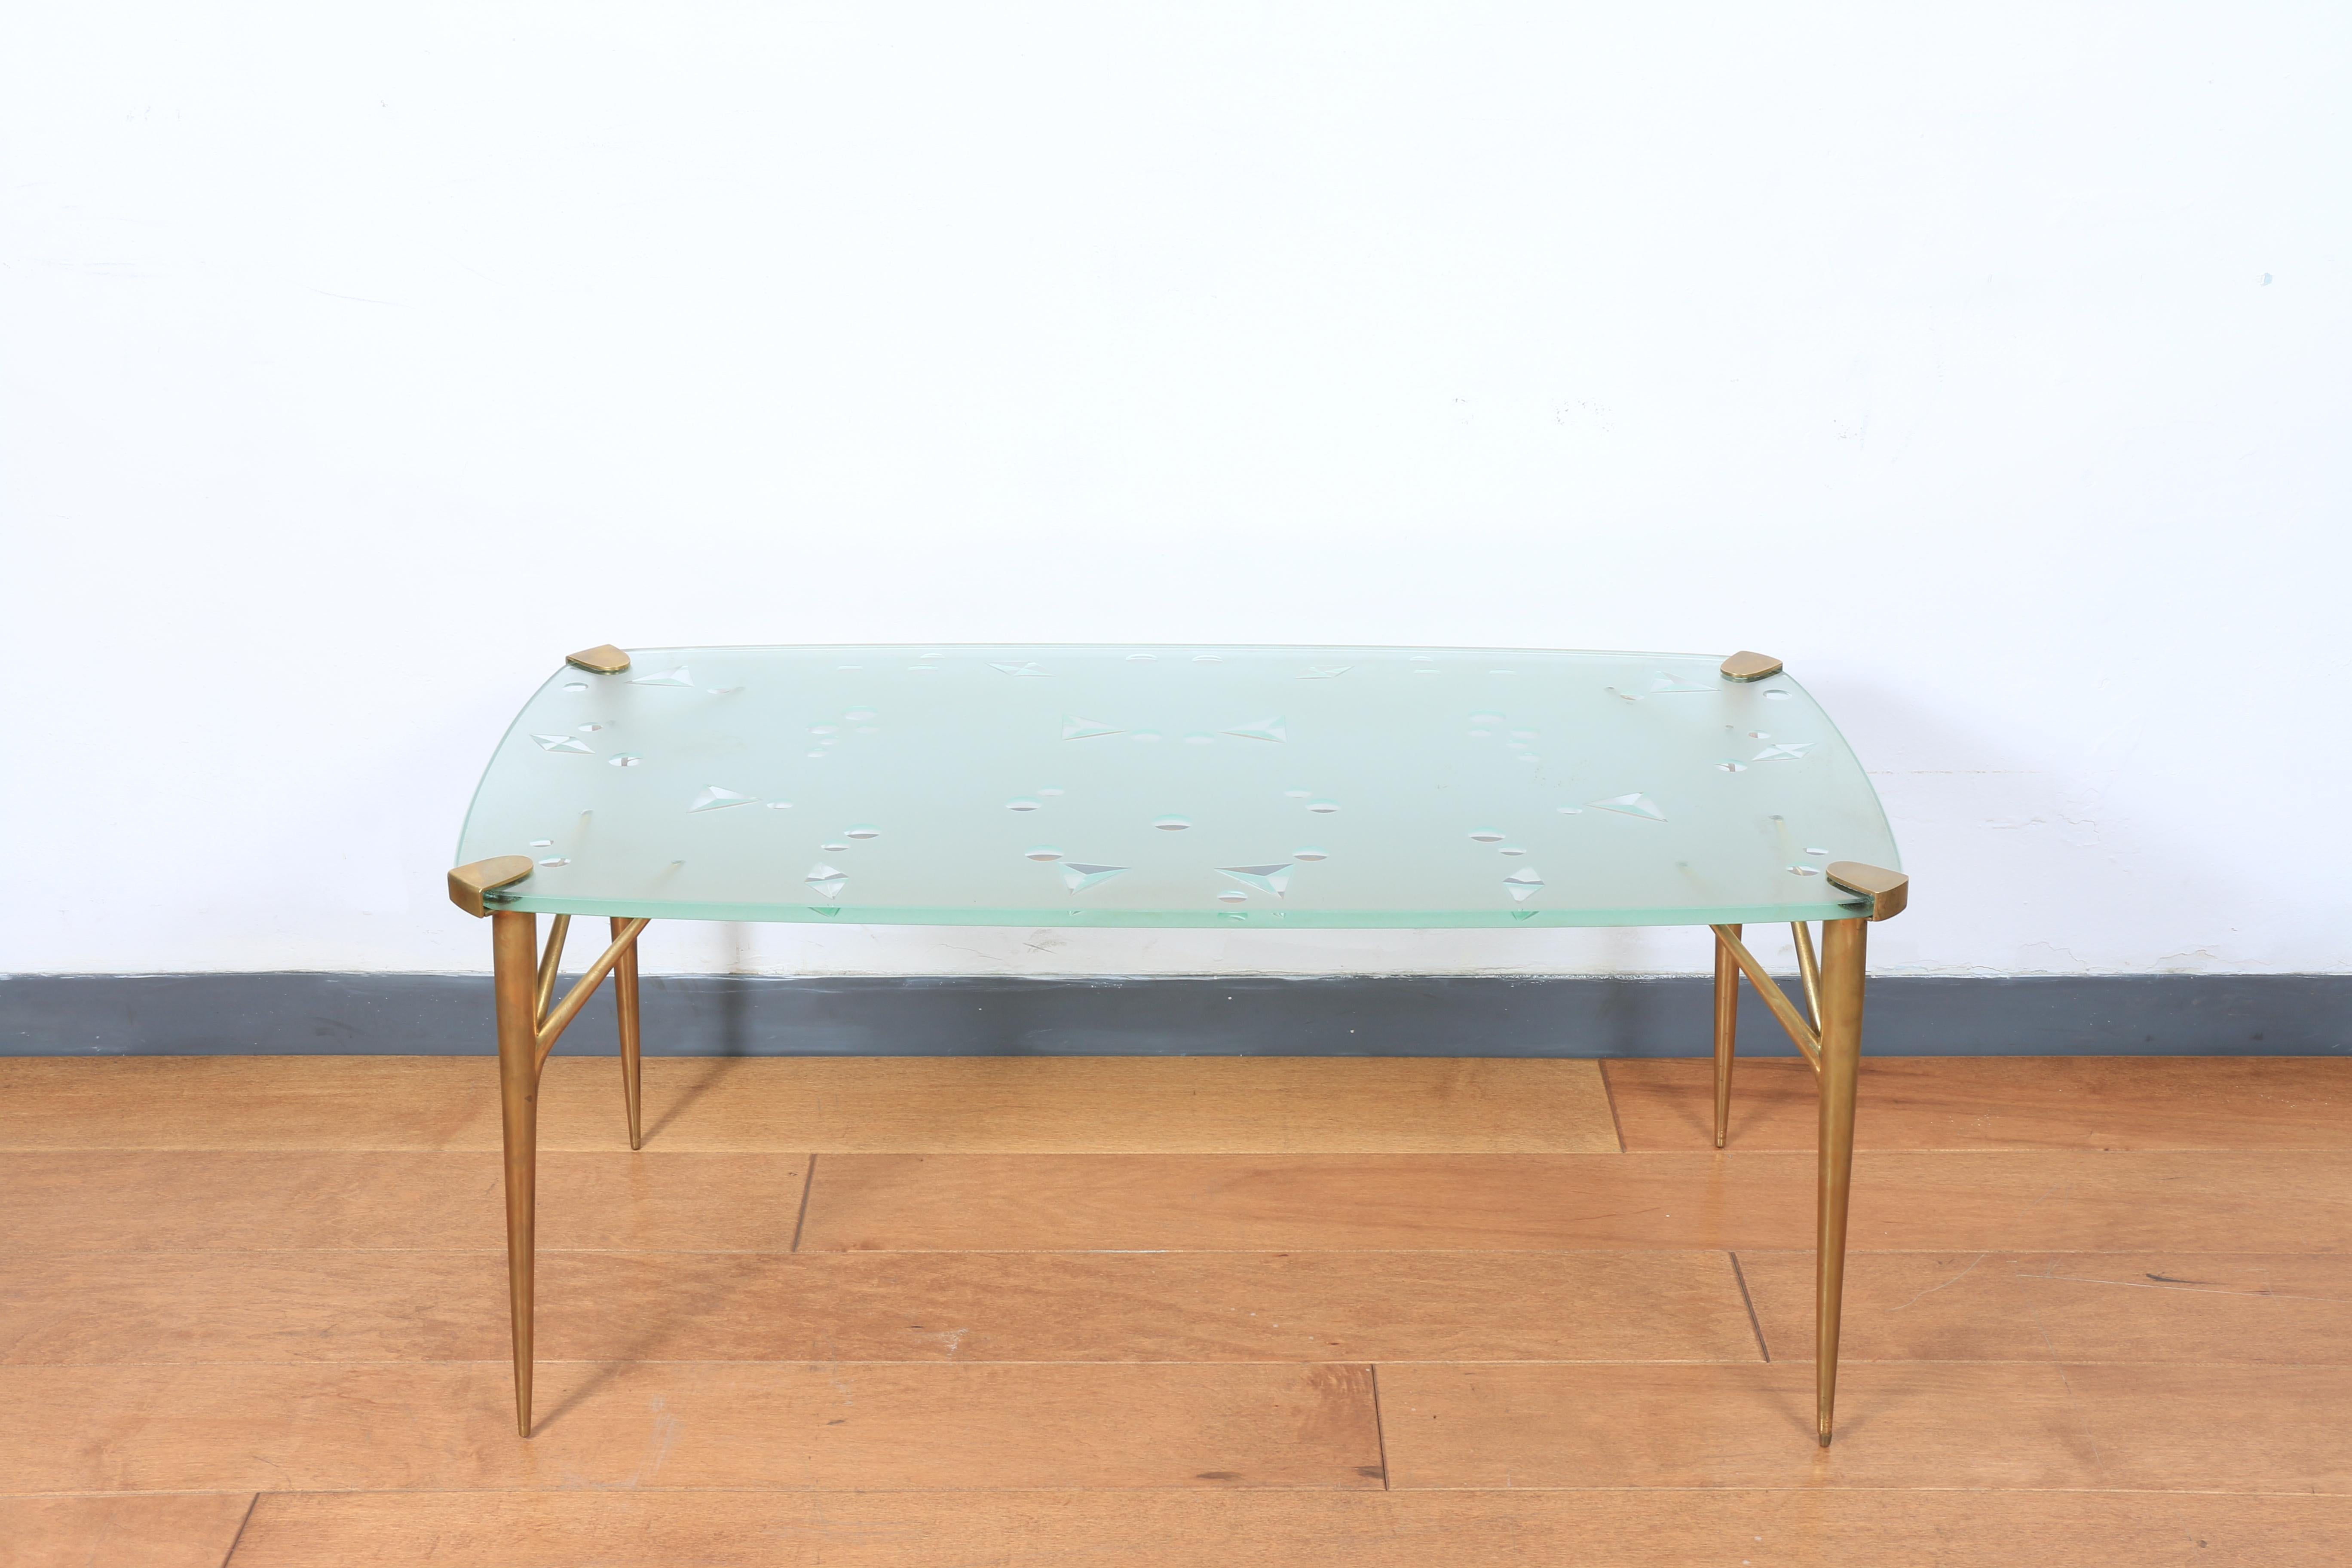 Gorgeous brass legs coffee table with beveled designed glass top. No damages on legs or on glass top. Will look amazing in any place!